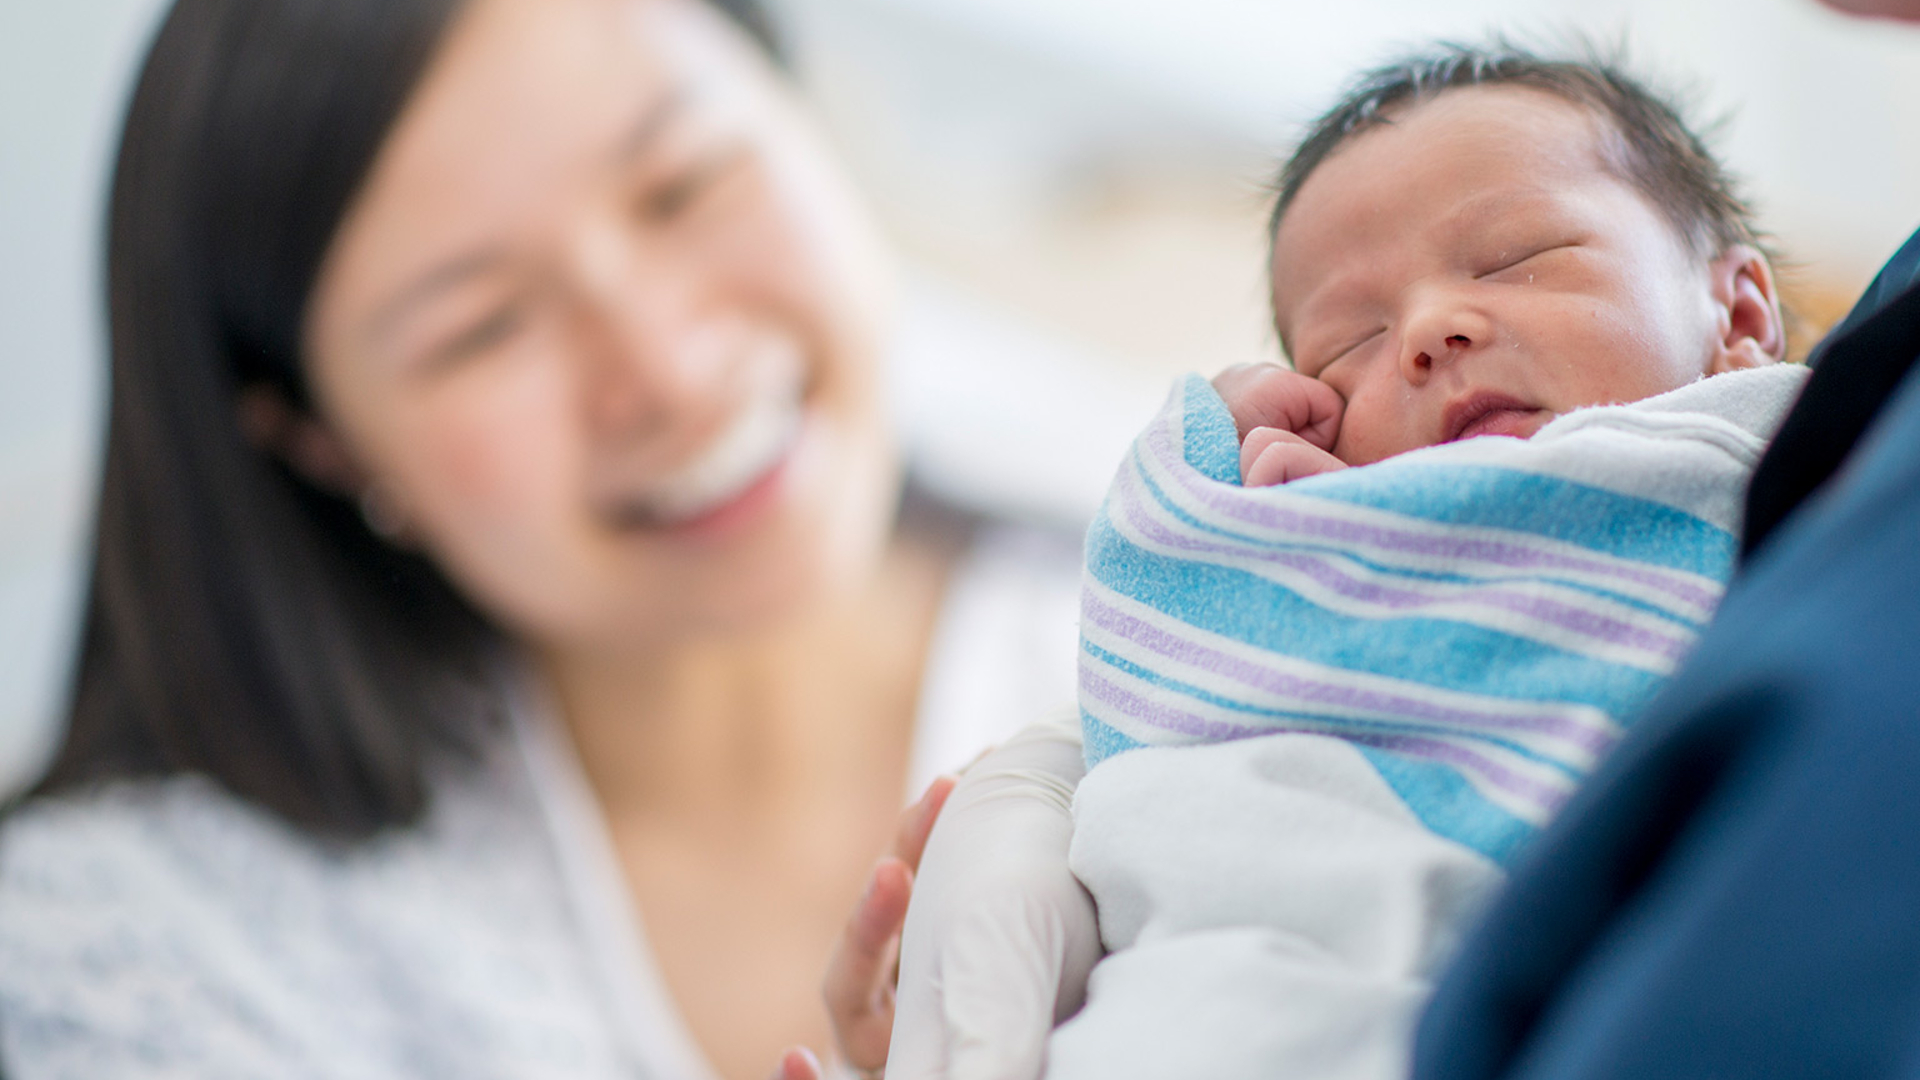 New mom smiling at baby held by nurse